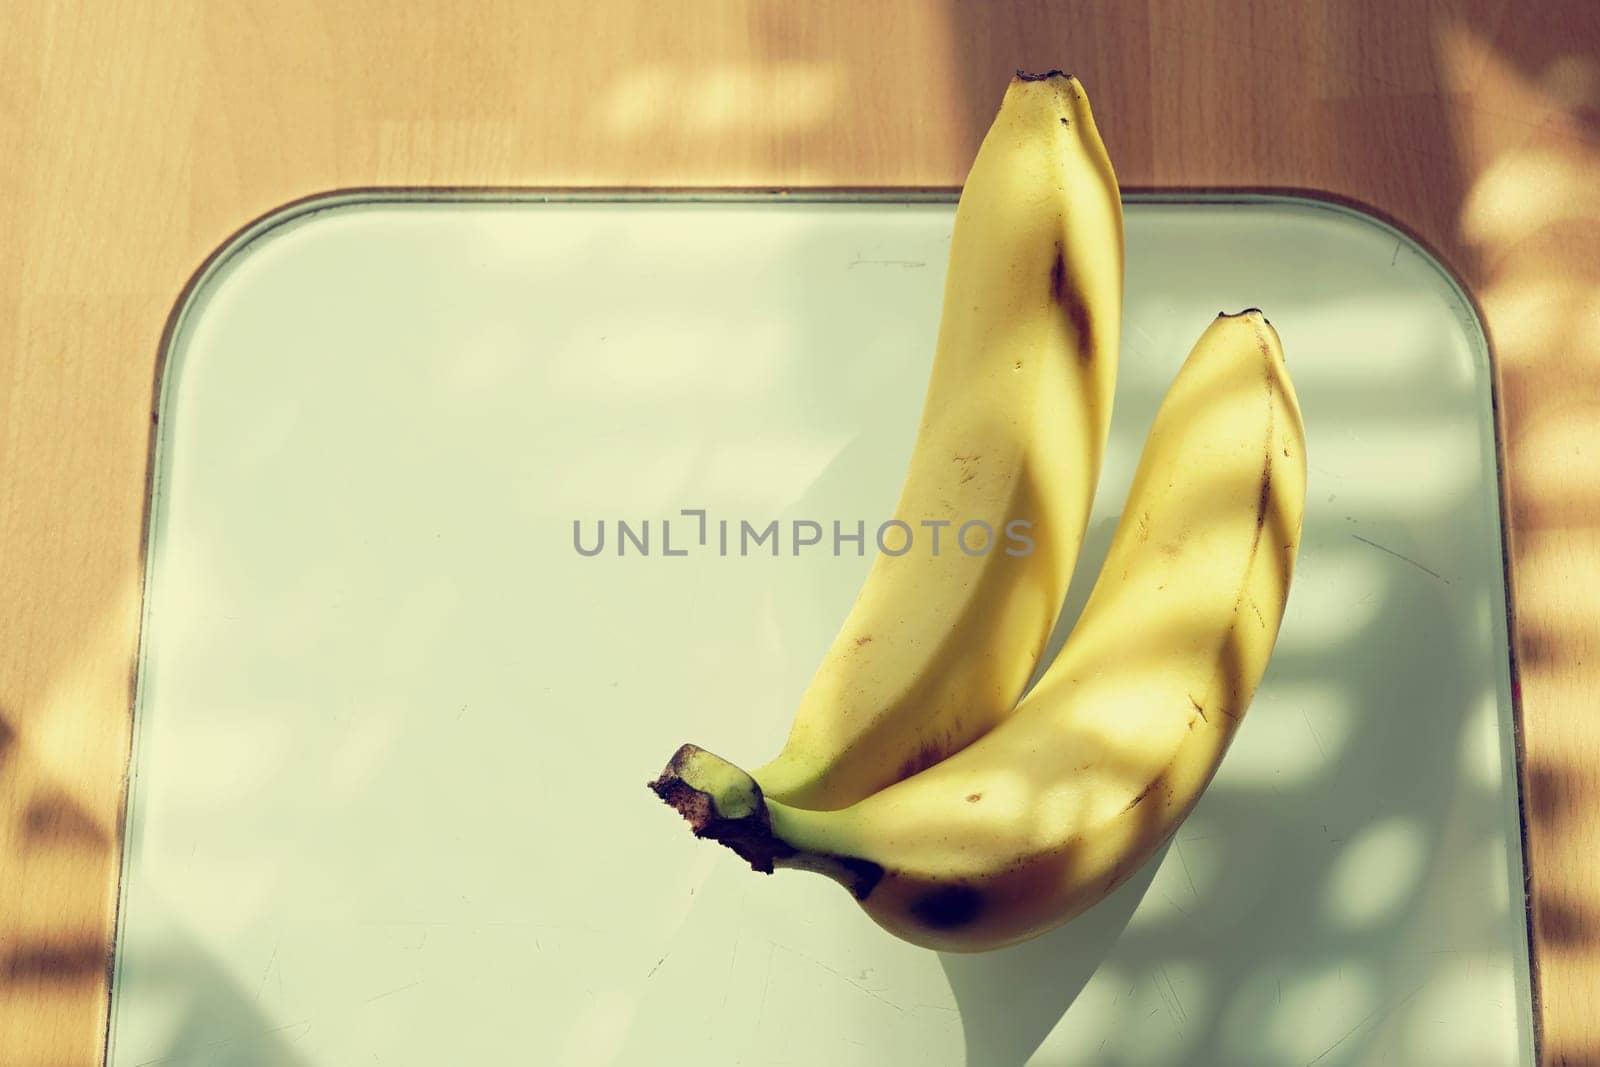 Beautiful fresh yellow banana on the table. Healthy food - fruit for a snack.